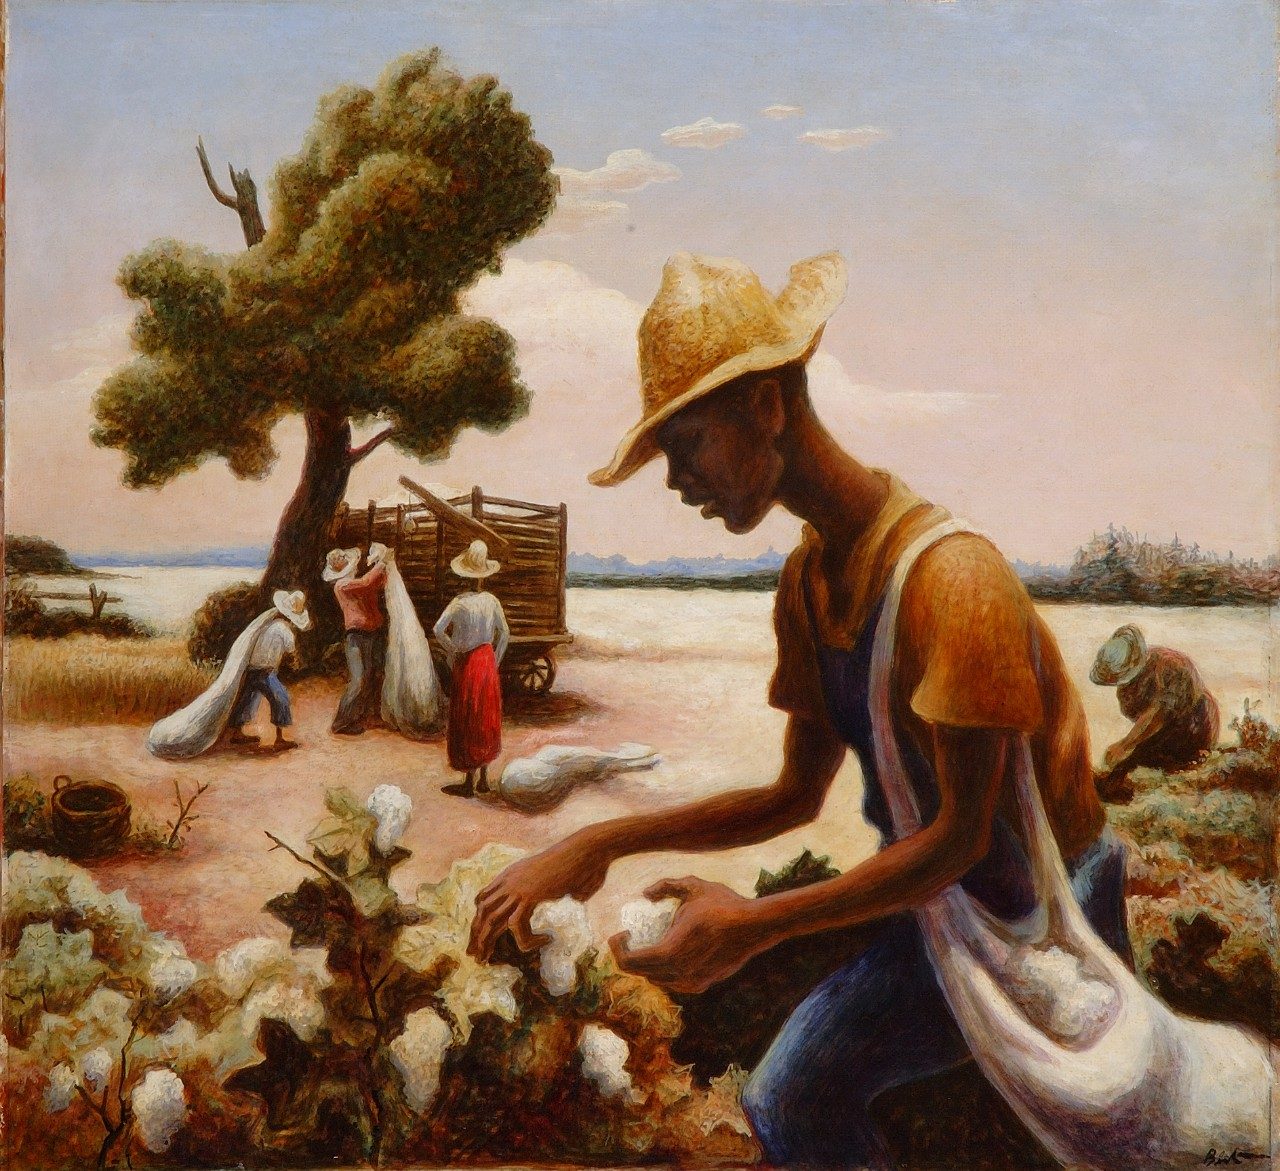 A view of Thomas Hart Benton's, "The Cotton Pickers," tempera on masonite, circa 1943. The painting was acquired by the Taubman Museum of Art with funds provided by Horace G. Fralin Charitable Trust.
Image courtesy of the Taubman Museum of Art.